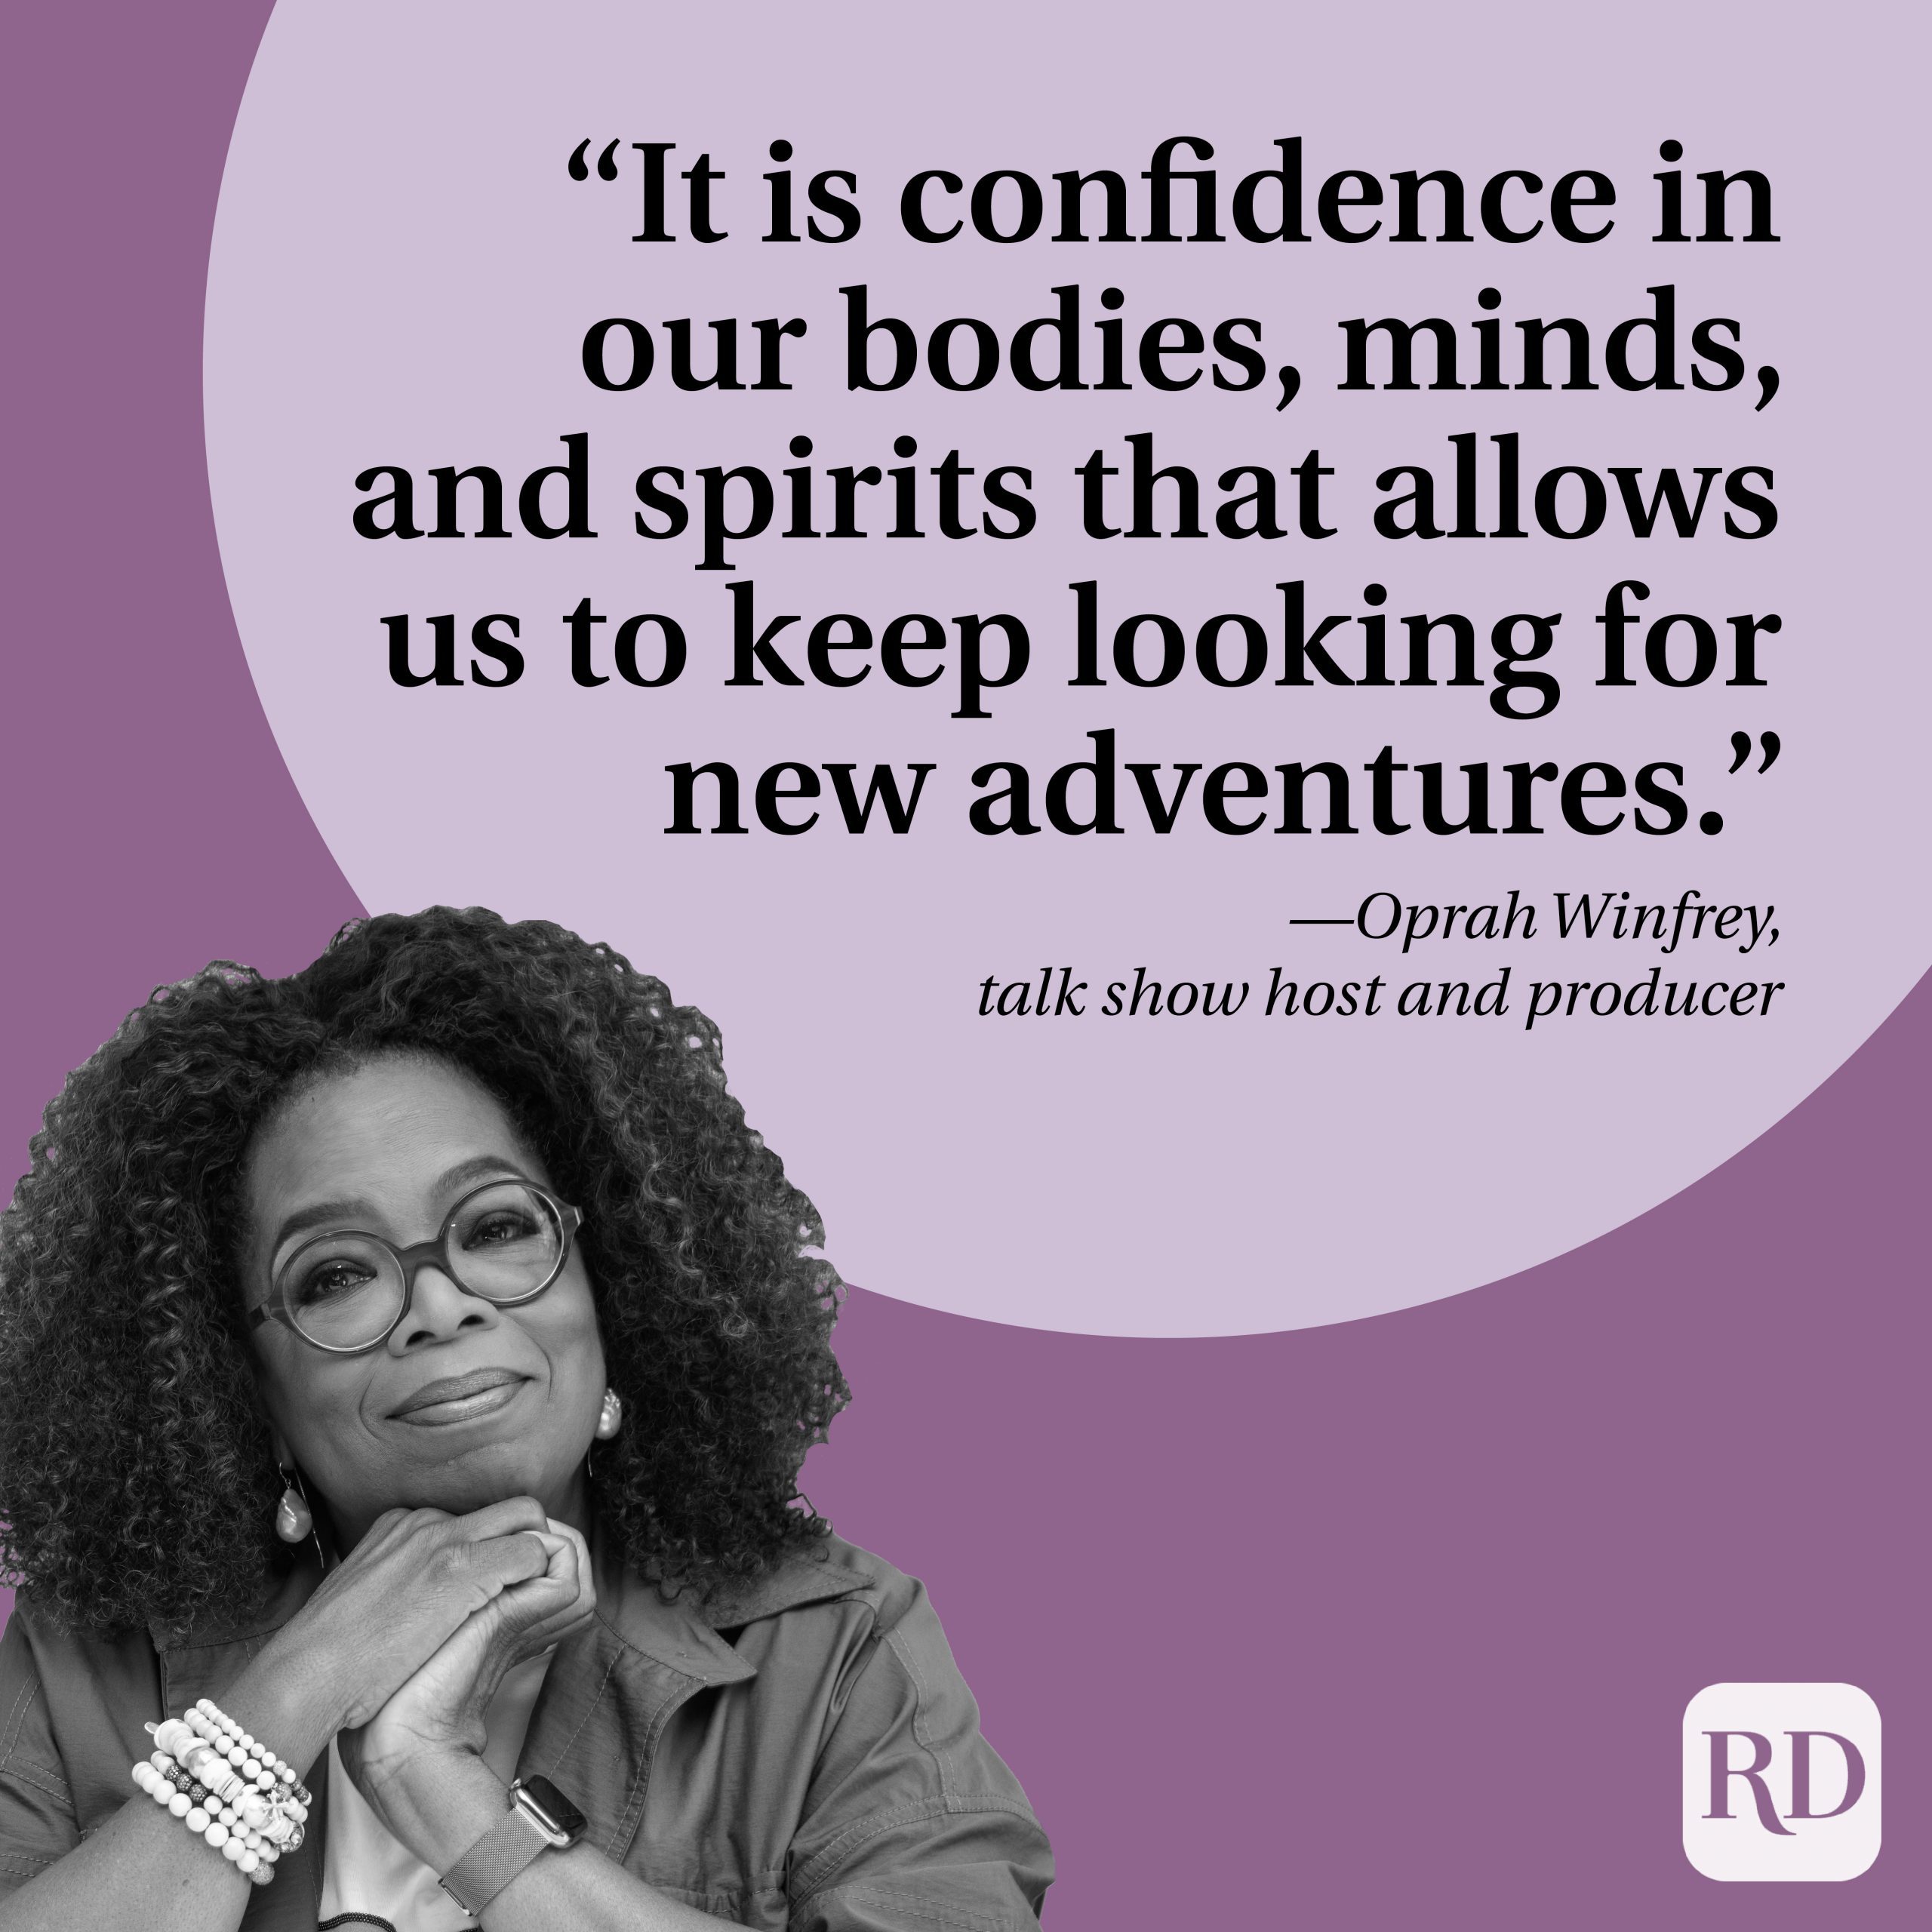 It is confidence in our bodies, minds, and spirits that allows us to keep looking for new adventures.” —Oprah Winfrey, talk show host and producer